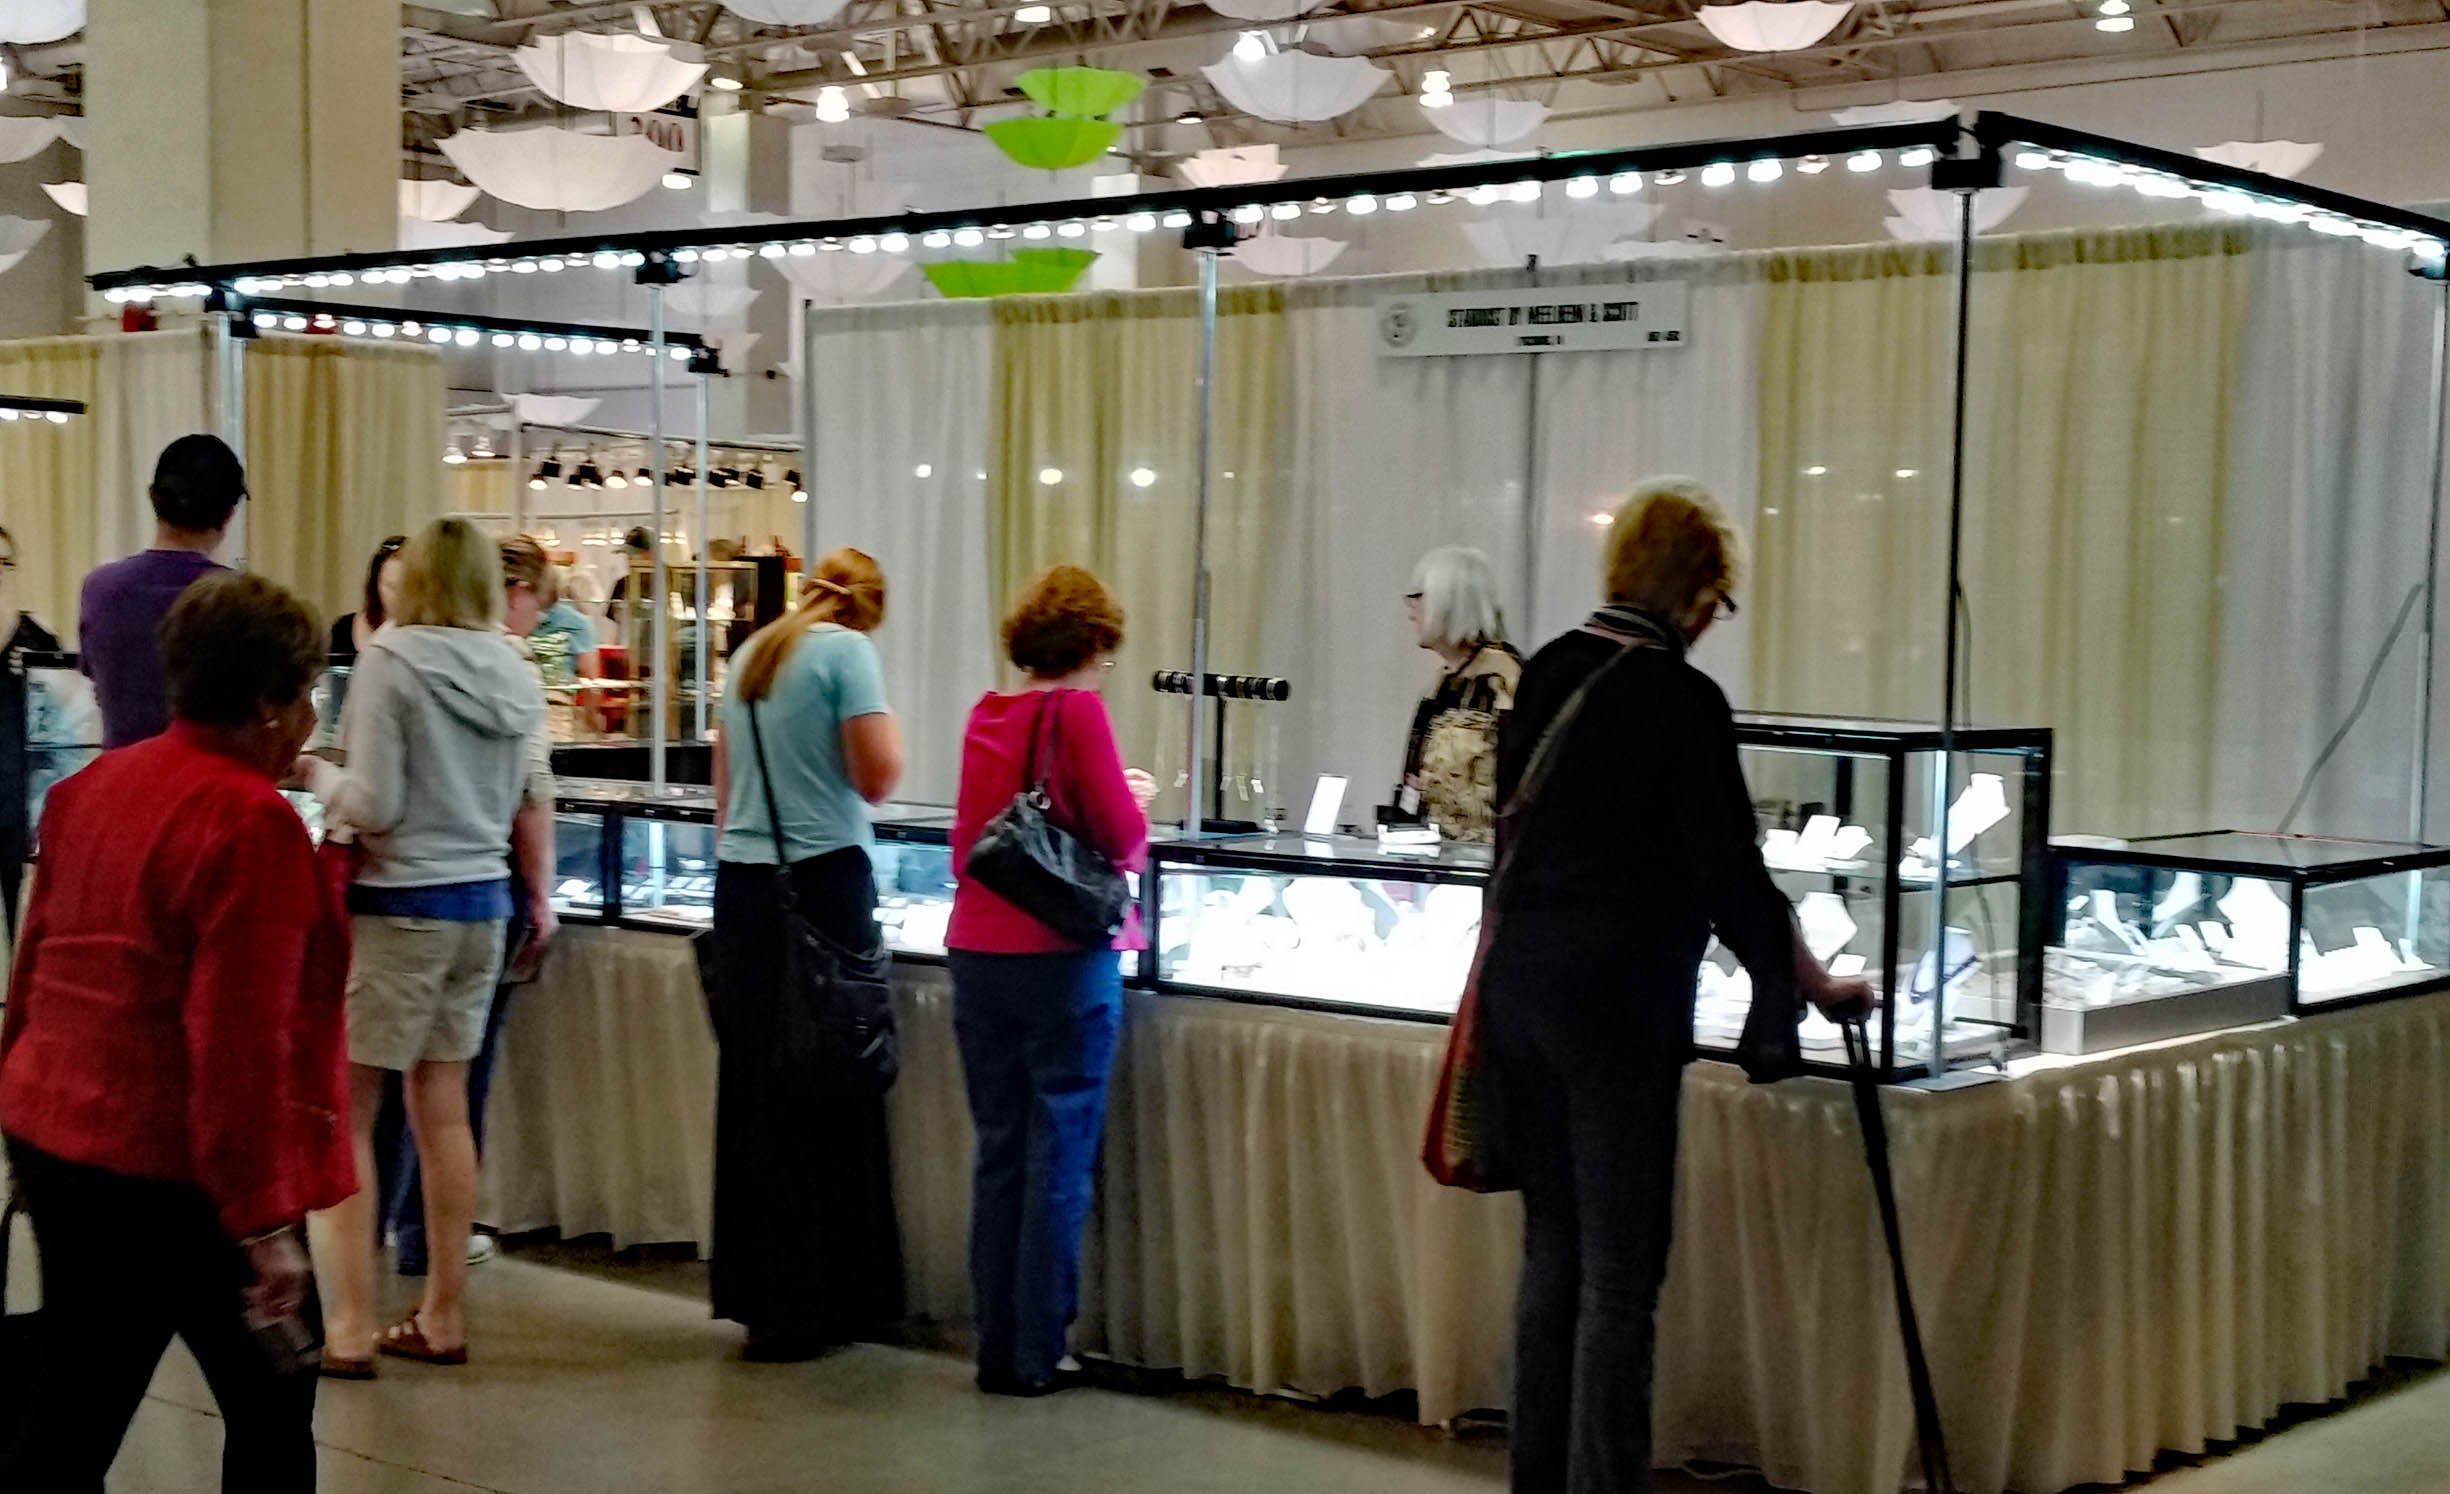 Look professional and help to increase sales with proper trade show lighting